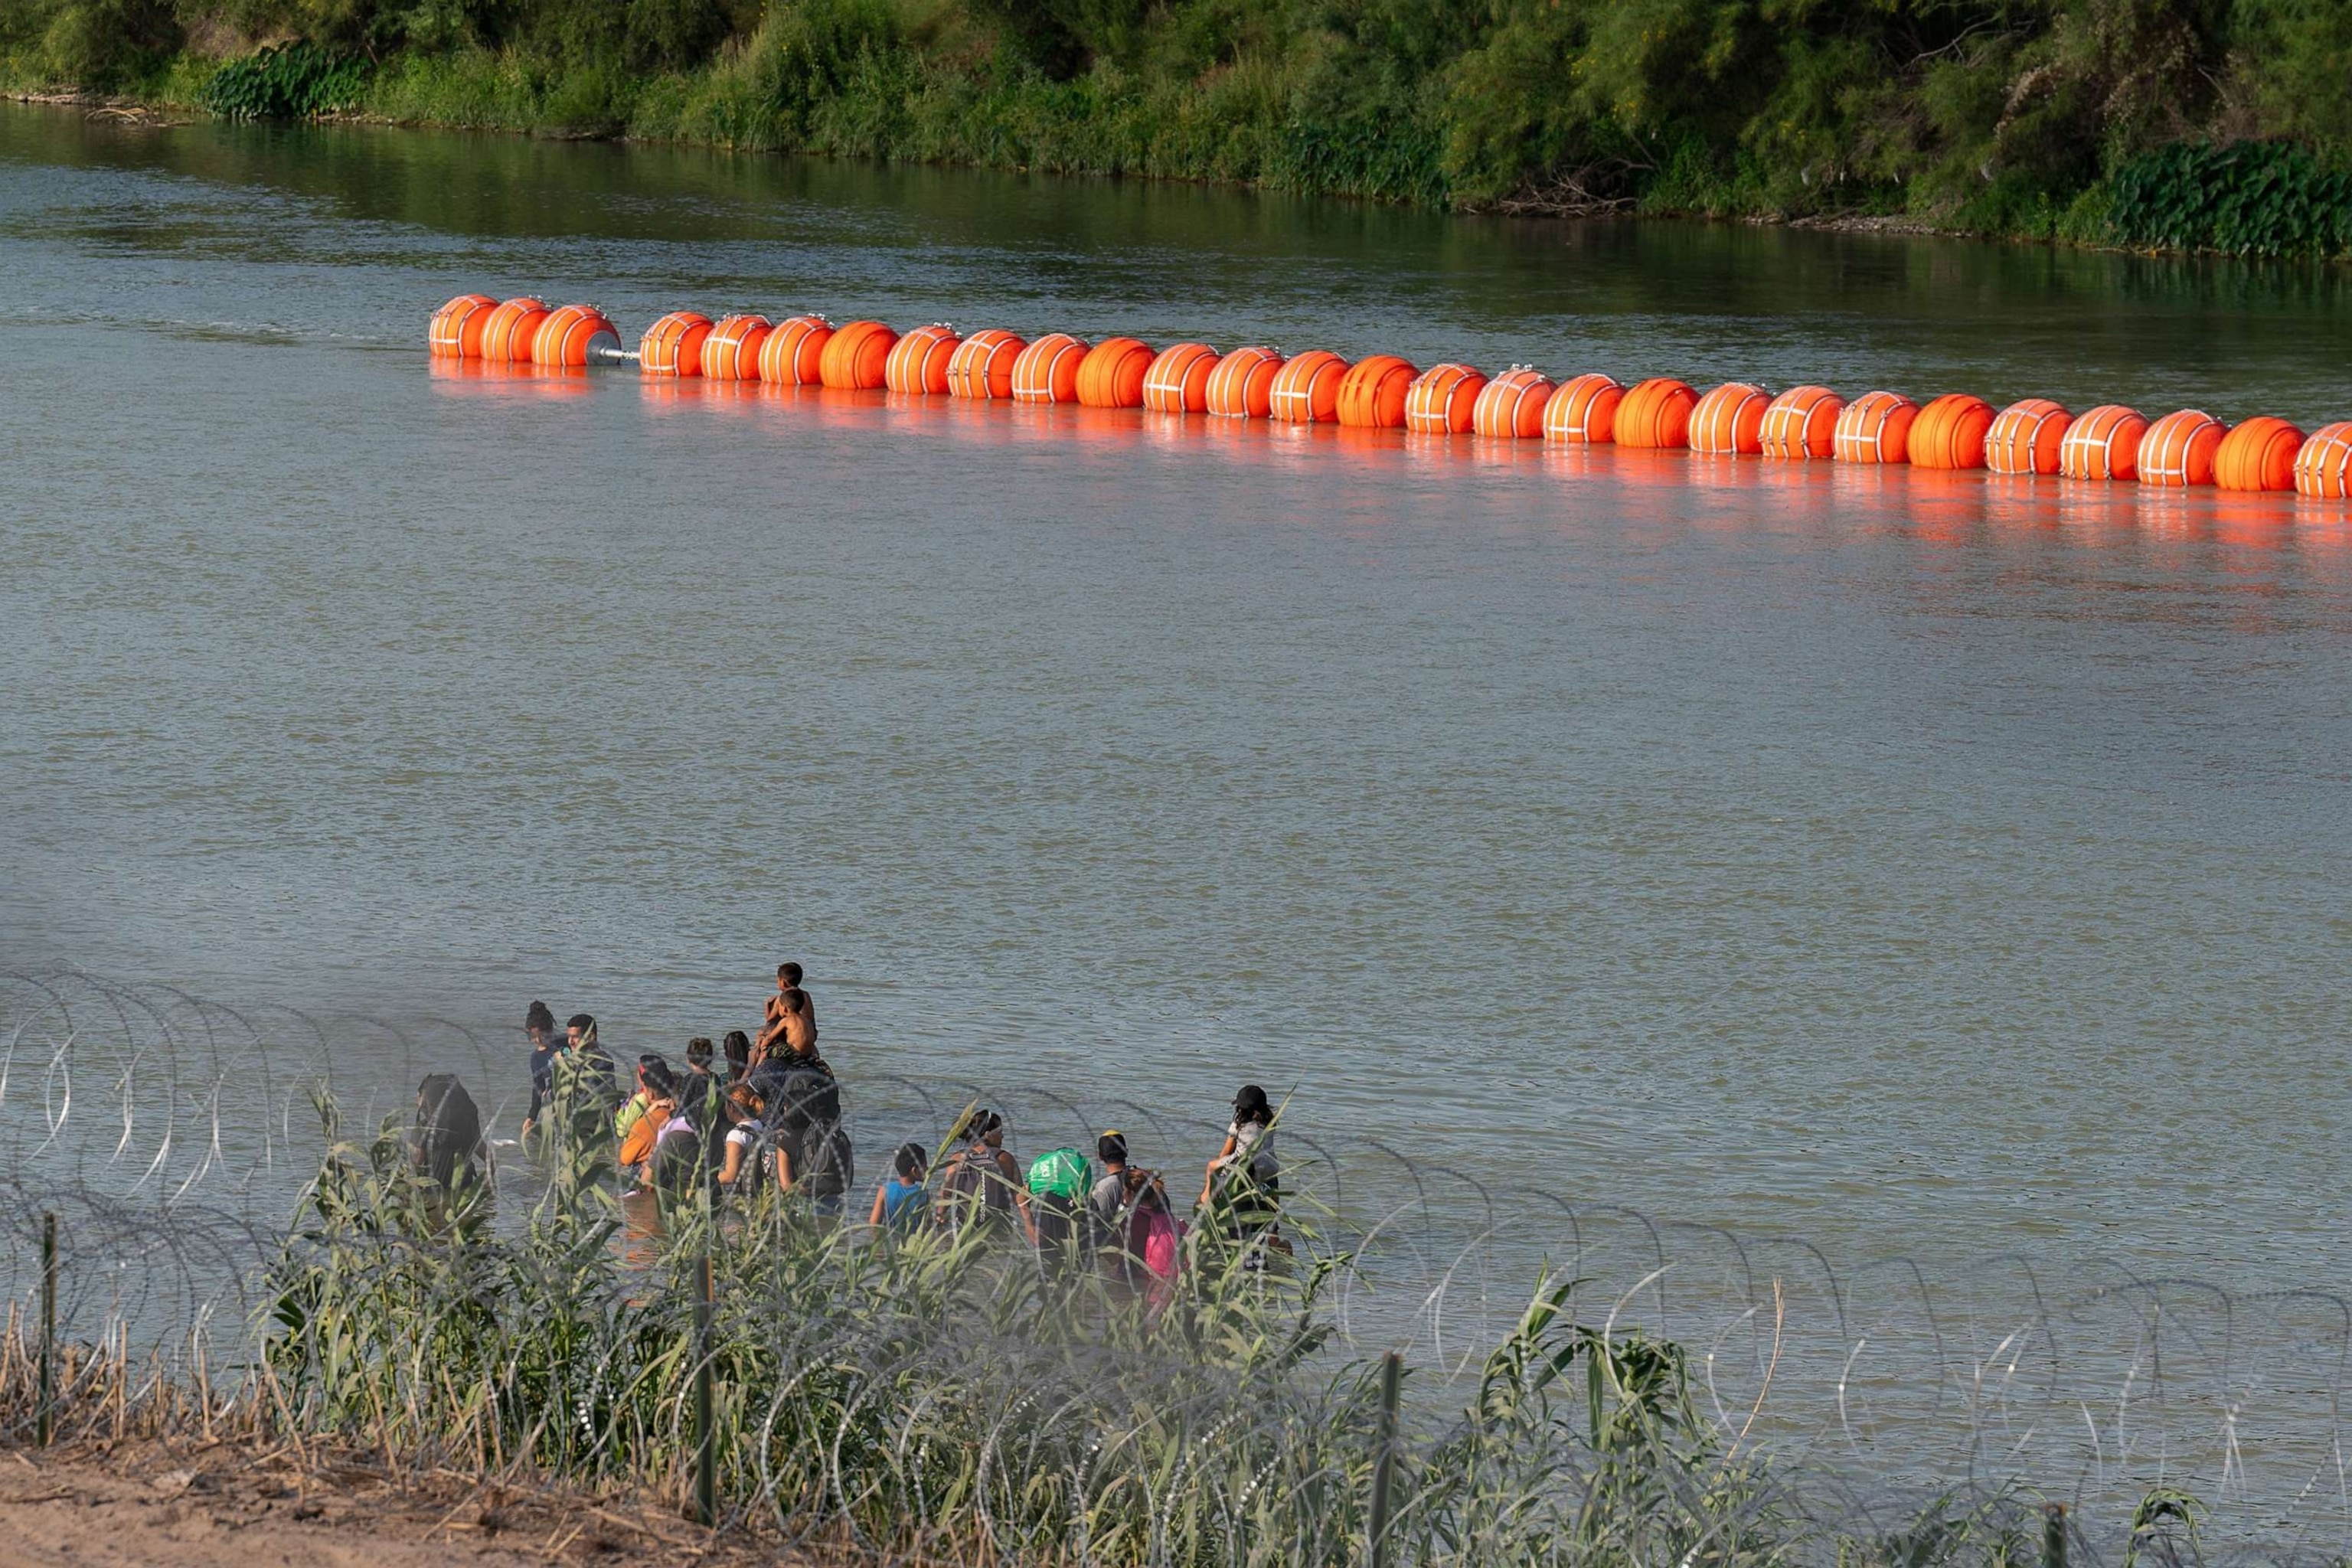 PHOTO: In this July 16, 2023, file photo, migrants walk by a string of buoys placed on the water along the Rio Grande border with Mexico, in Eagle Pass, Texas.